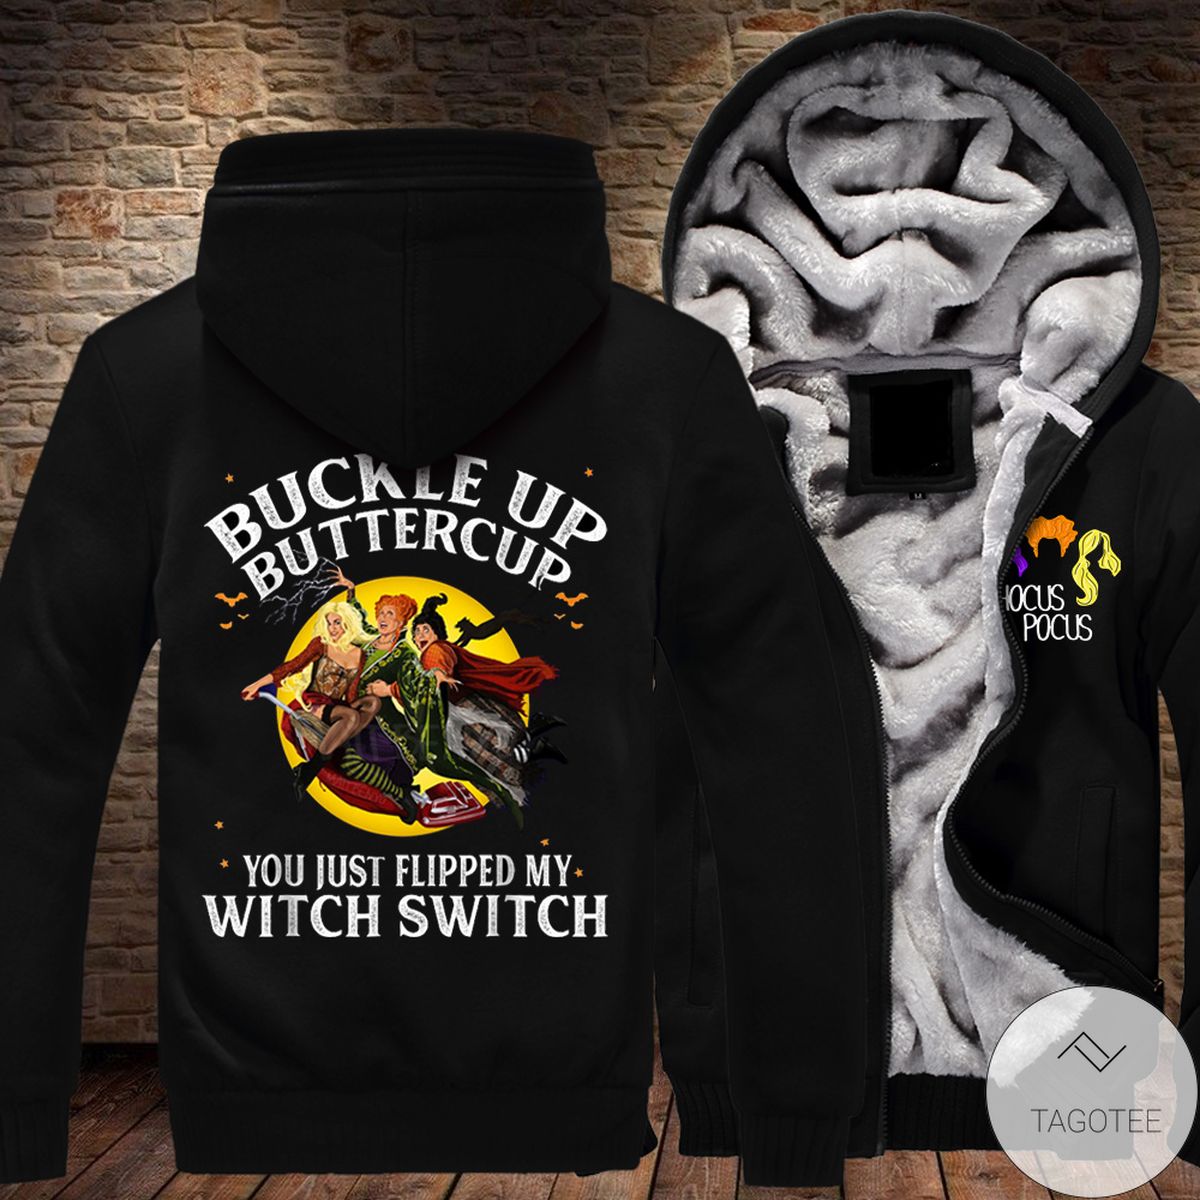 Hocus Pocus Buckle Up Buttercup You Just Flipped My Witch Switch Fleece Hoodie